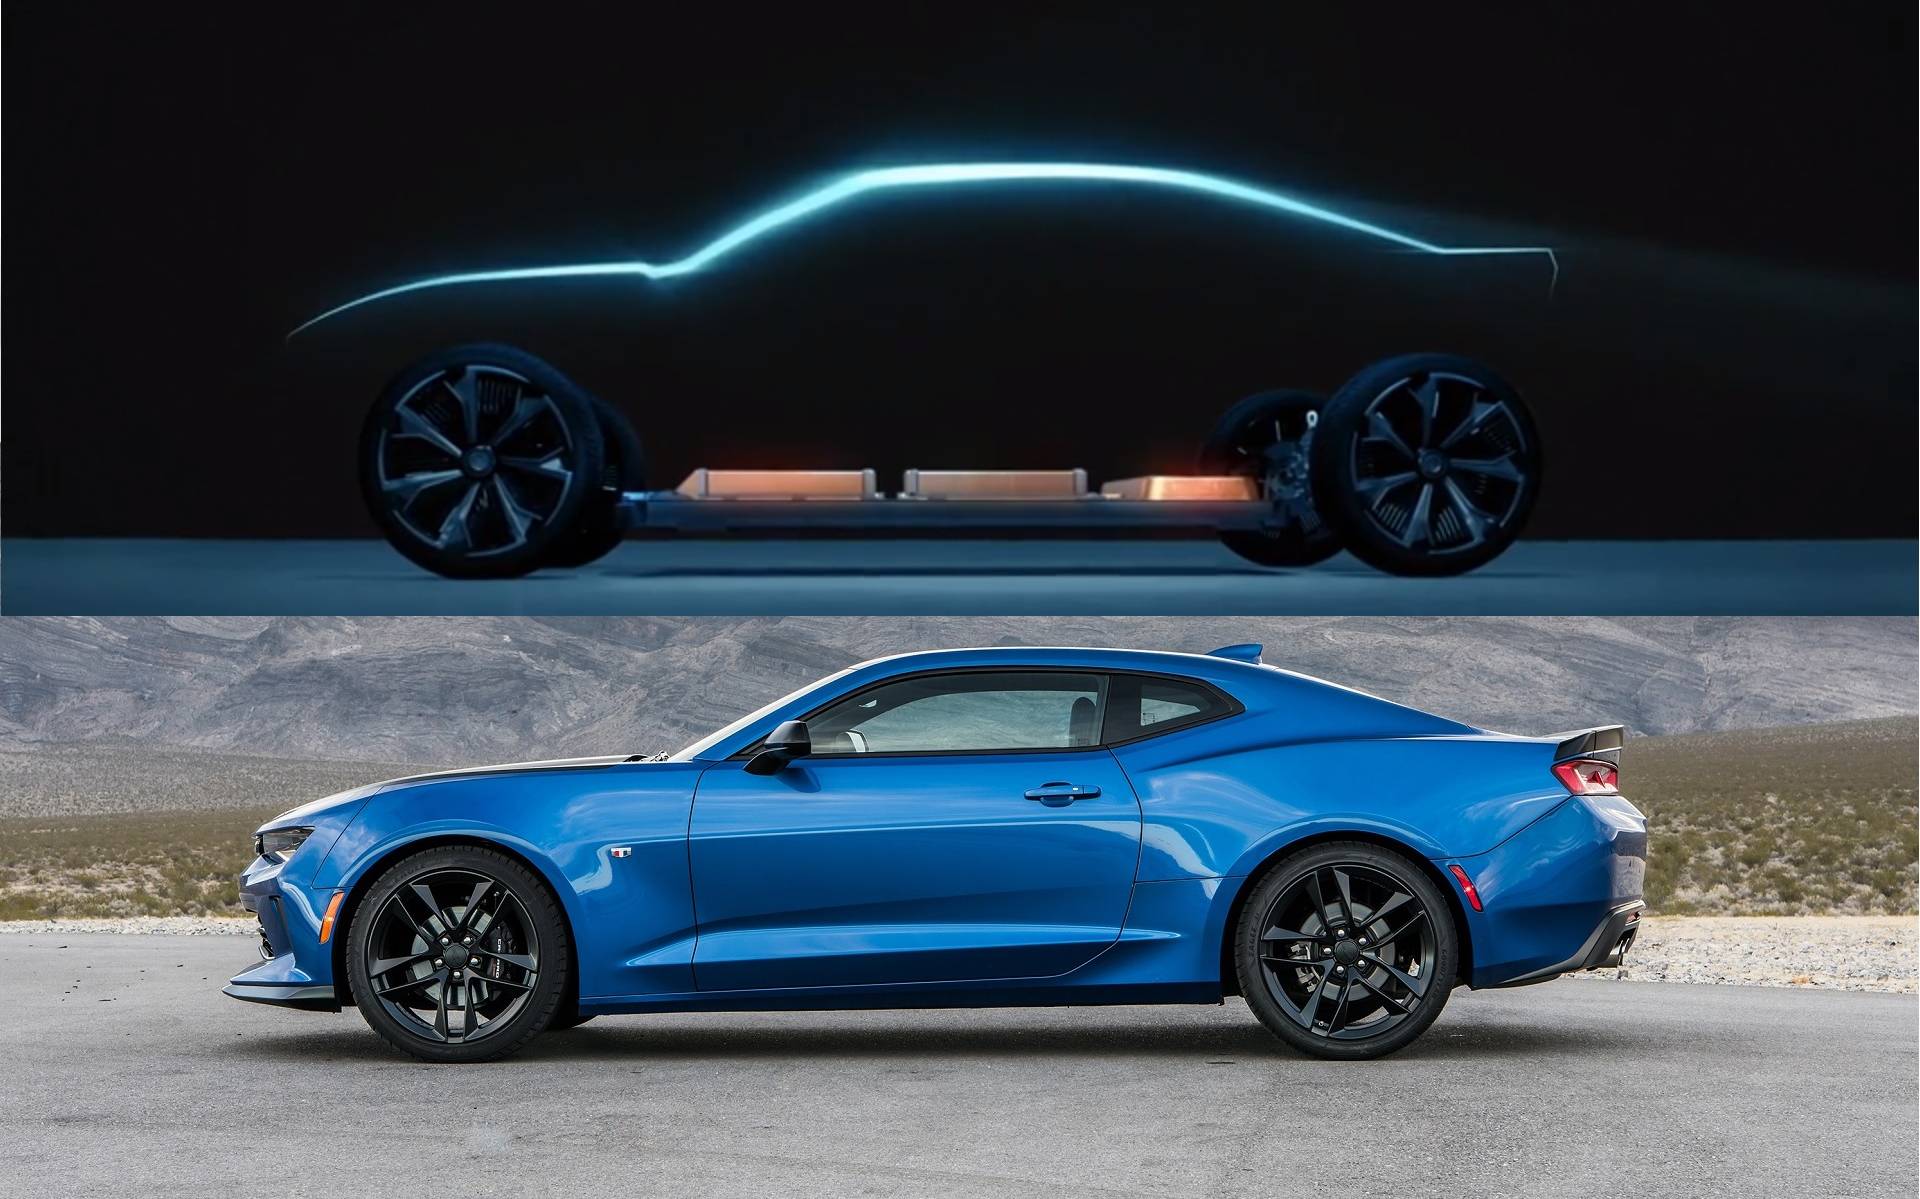 Is This Proof That a Chevy Camaro EV is Coming? - The Car Guide